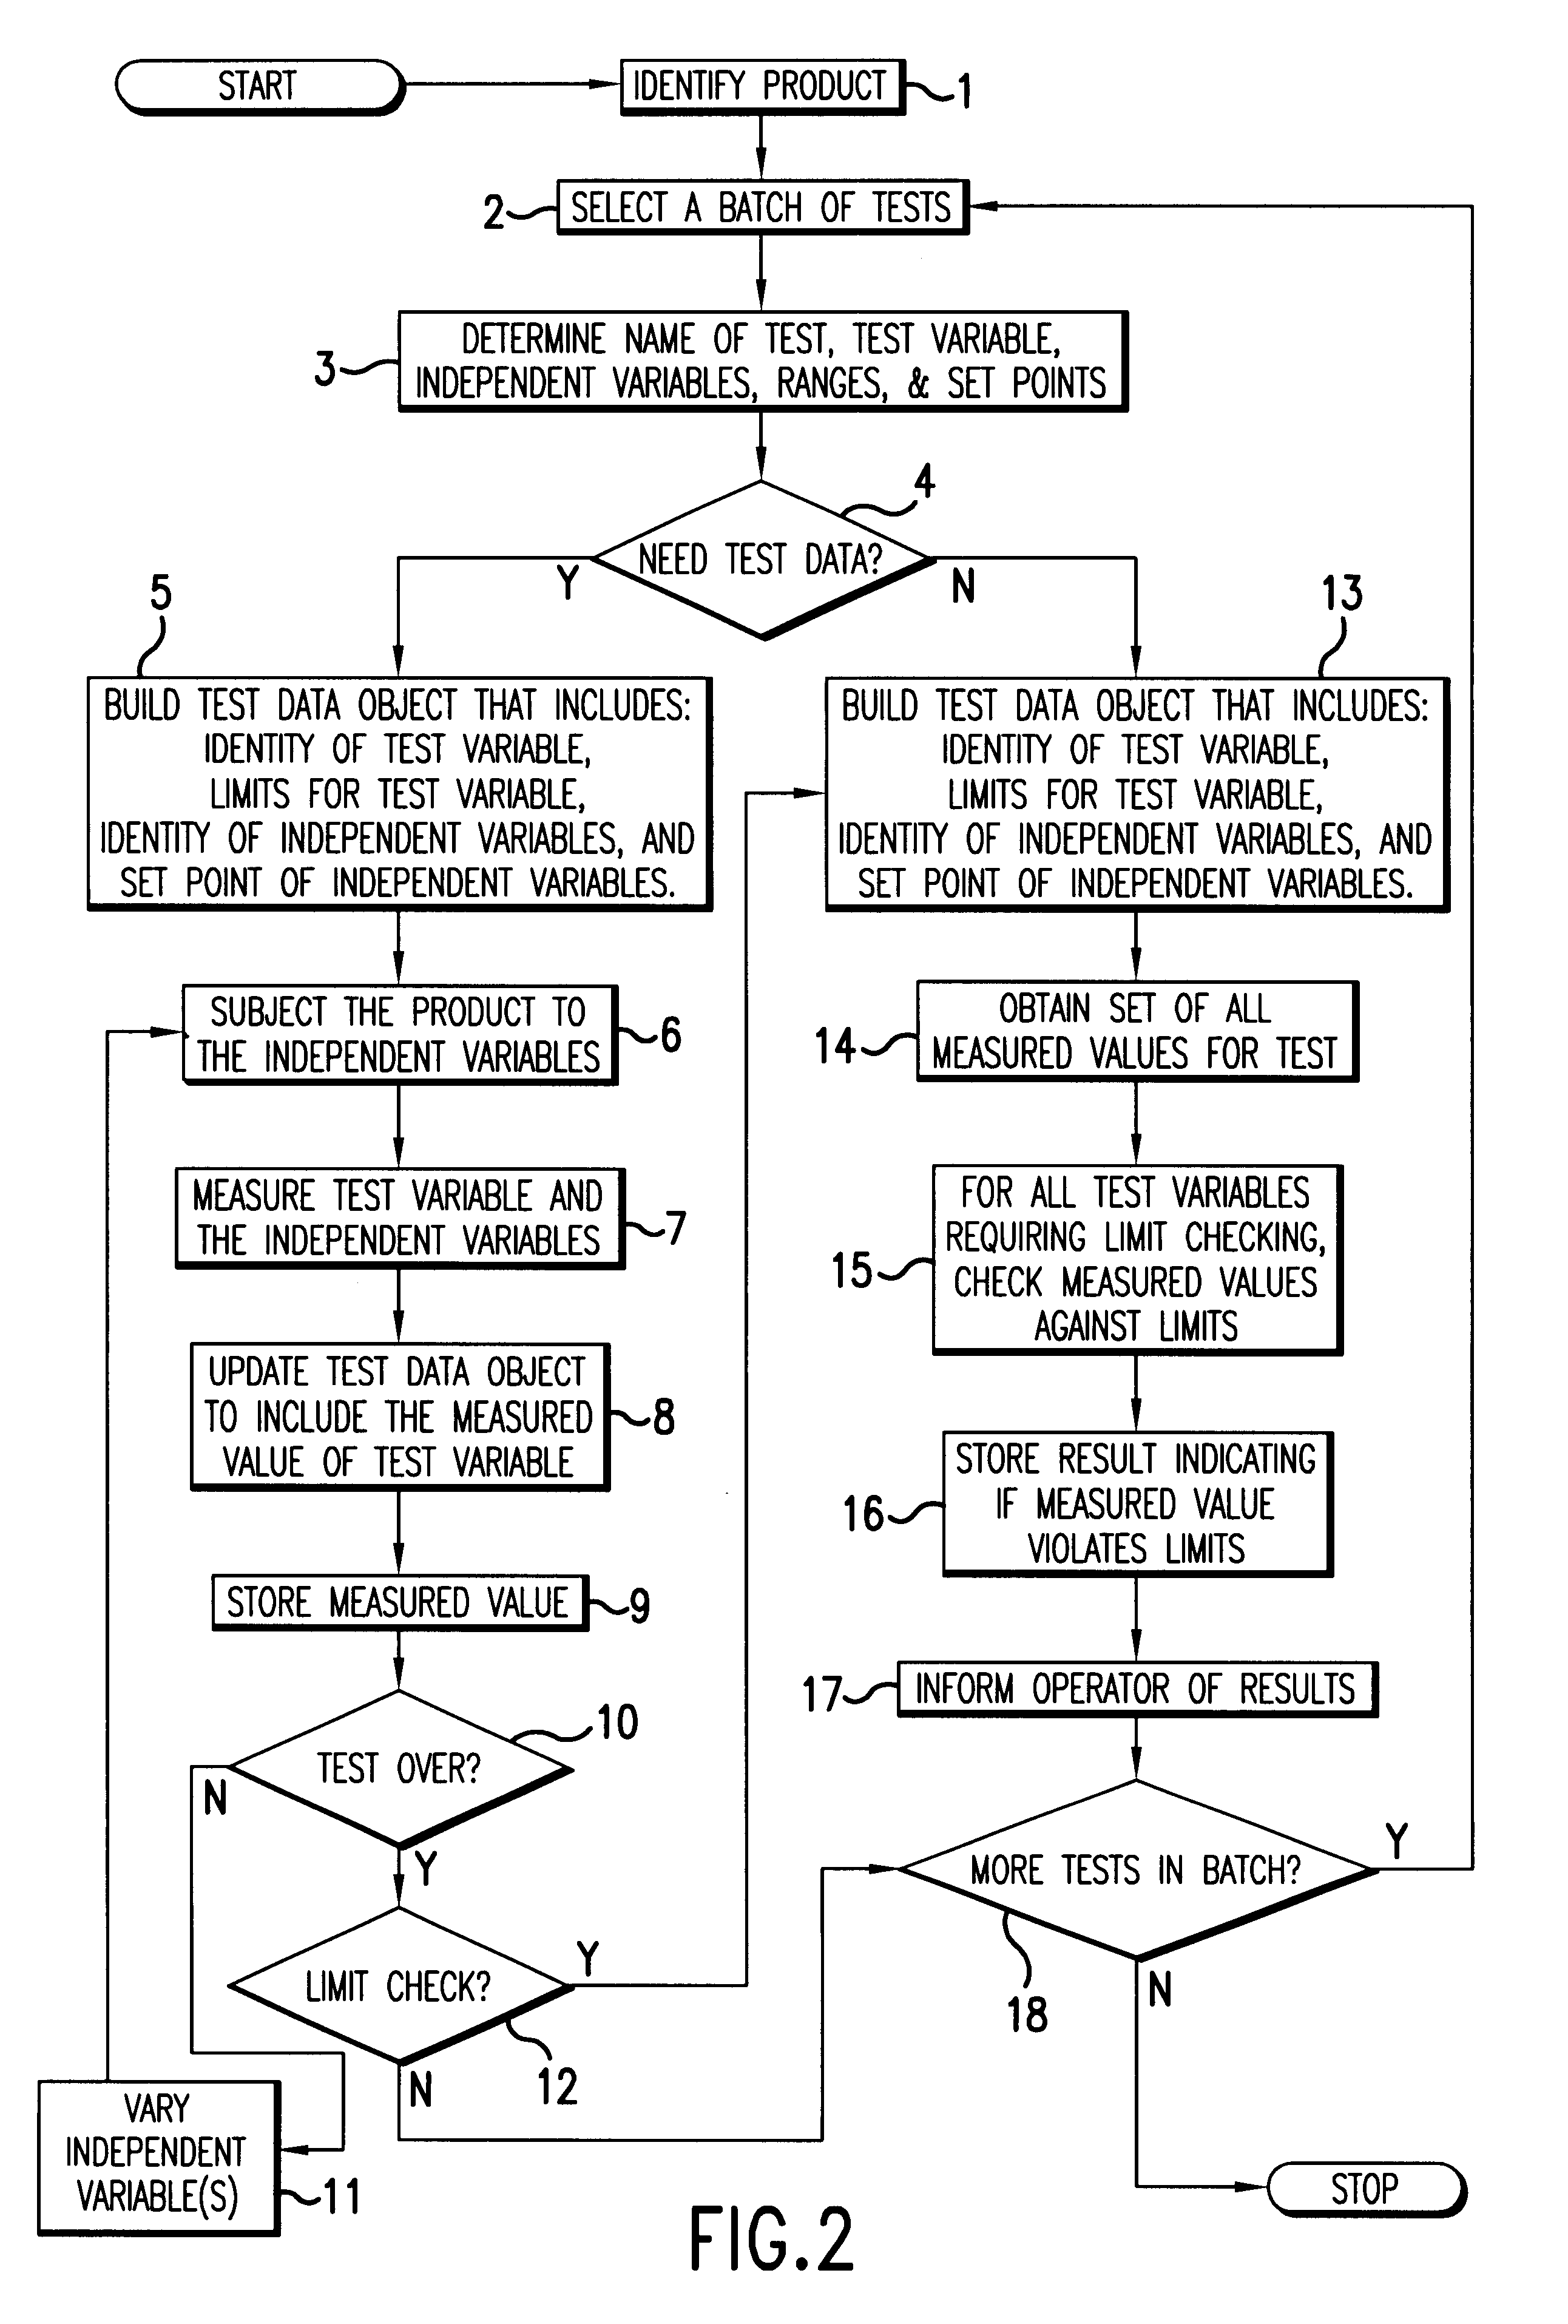 Method for collecting test measurements